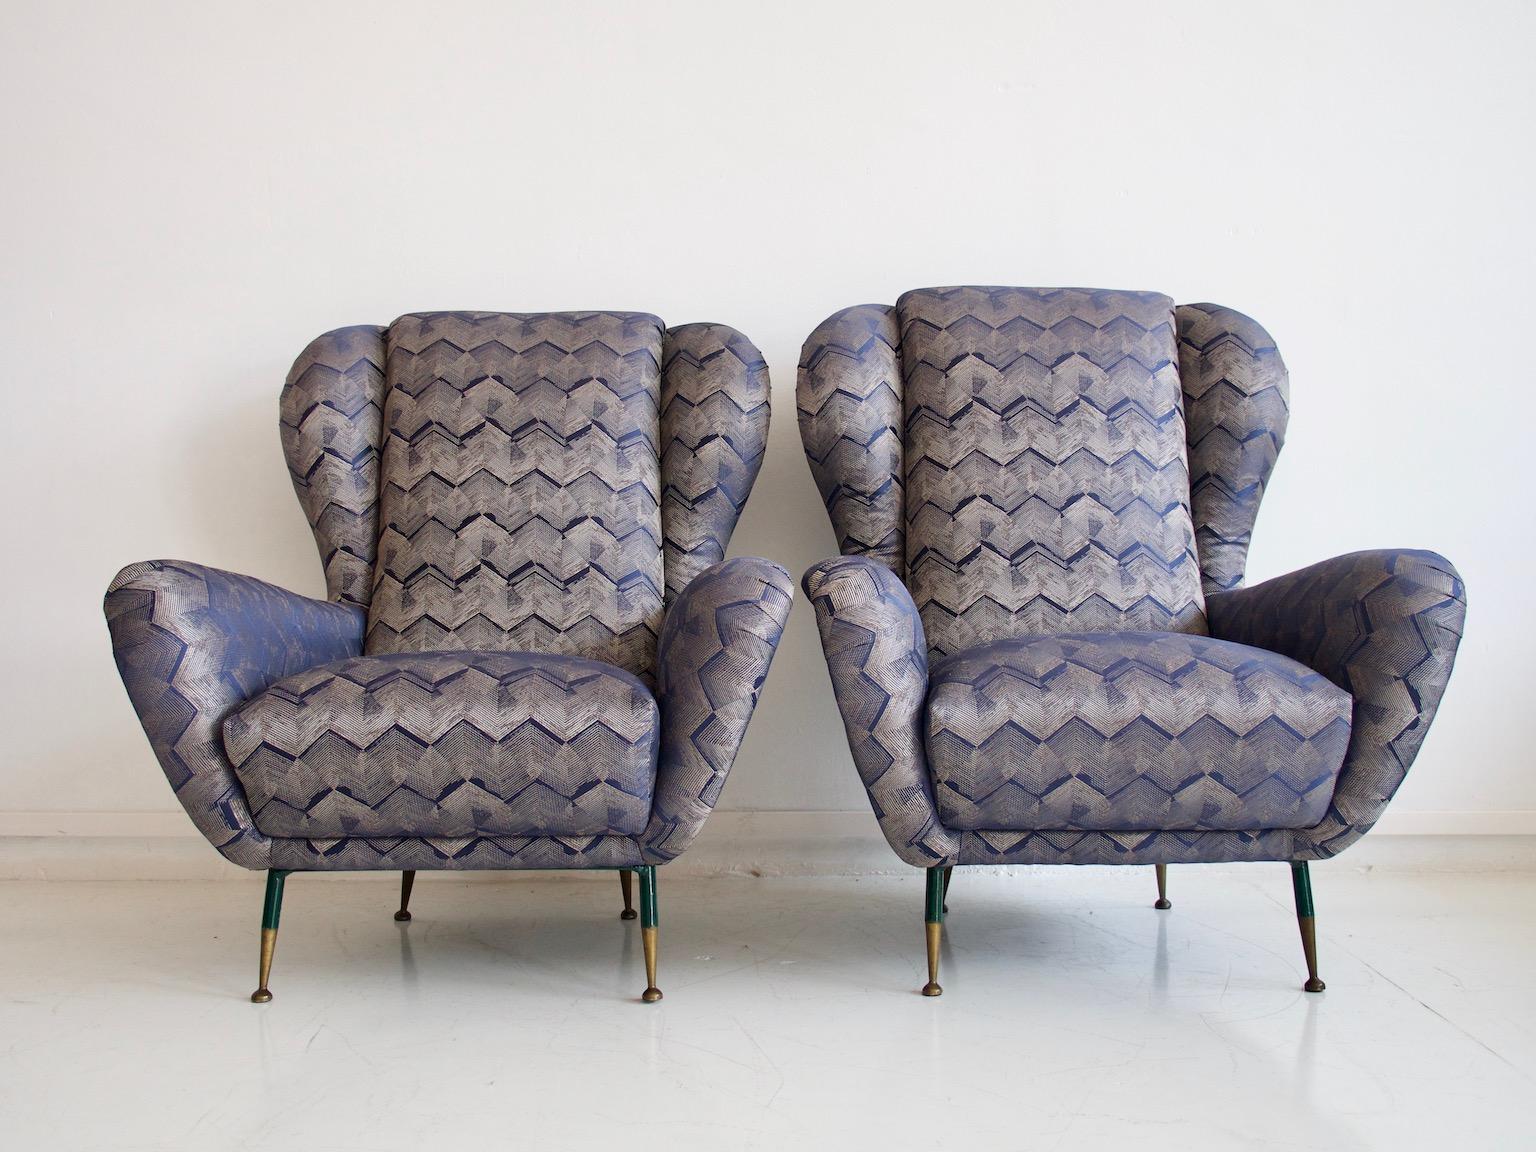 Beautiful pair of Italian 1950s armchairs reupholstered with dark blue and beige patterned slightly shiny fabric. Slim brass legs with dark green patina on the top part.